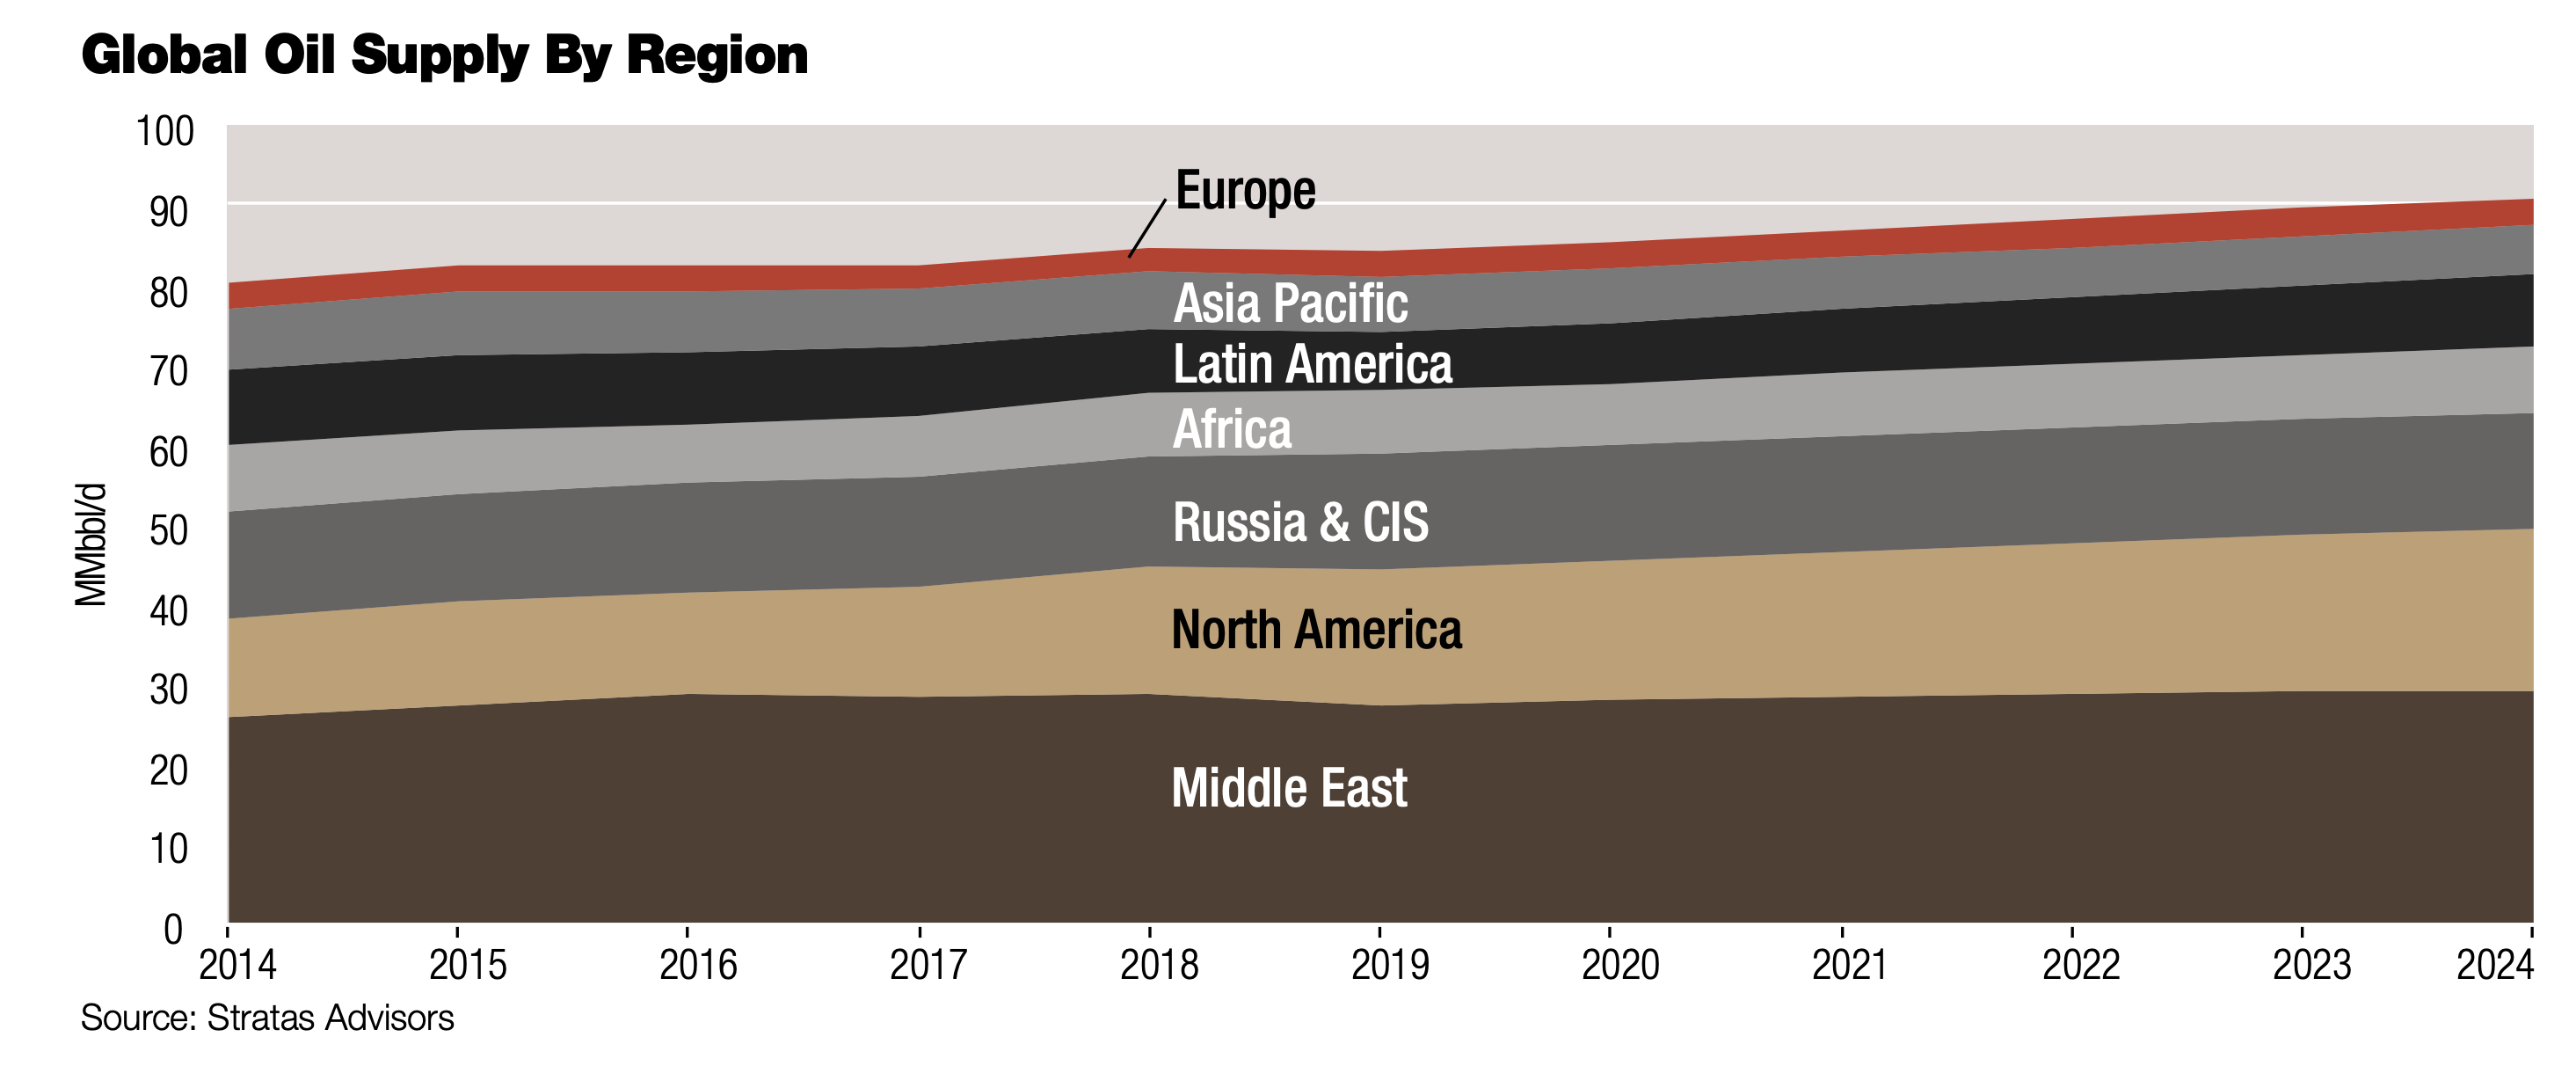 Global Oil Supply By Region (Source: Stratas Advisors)